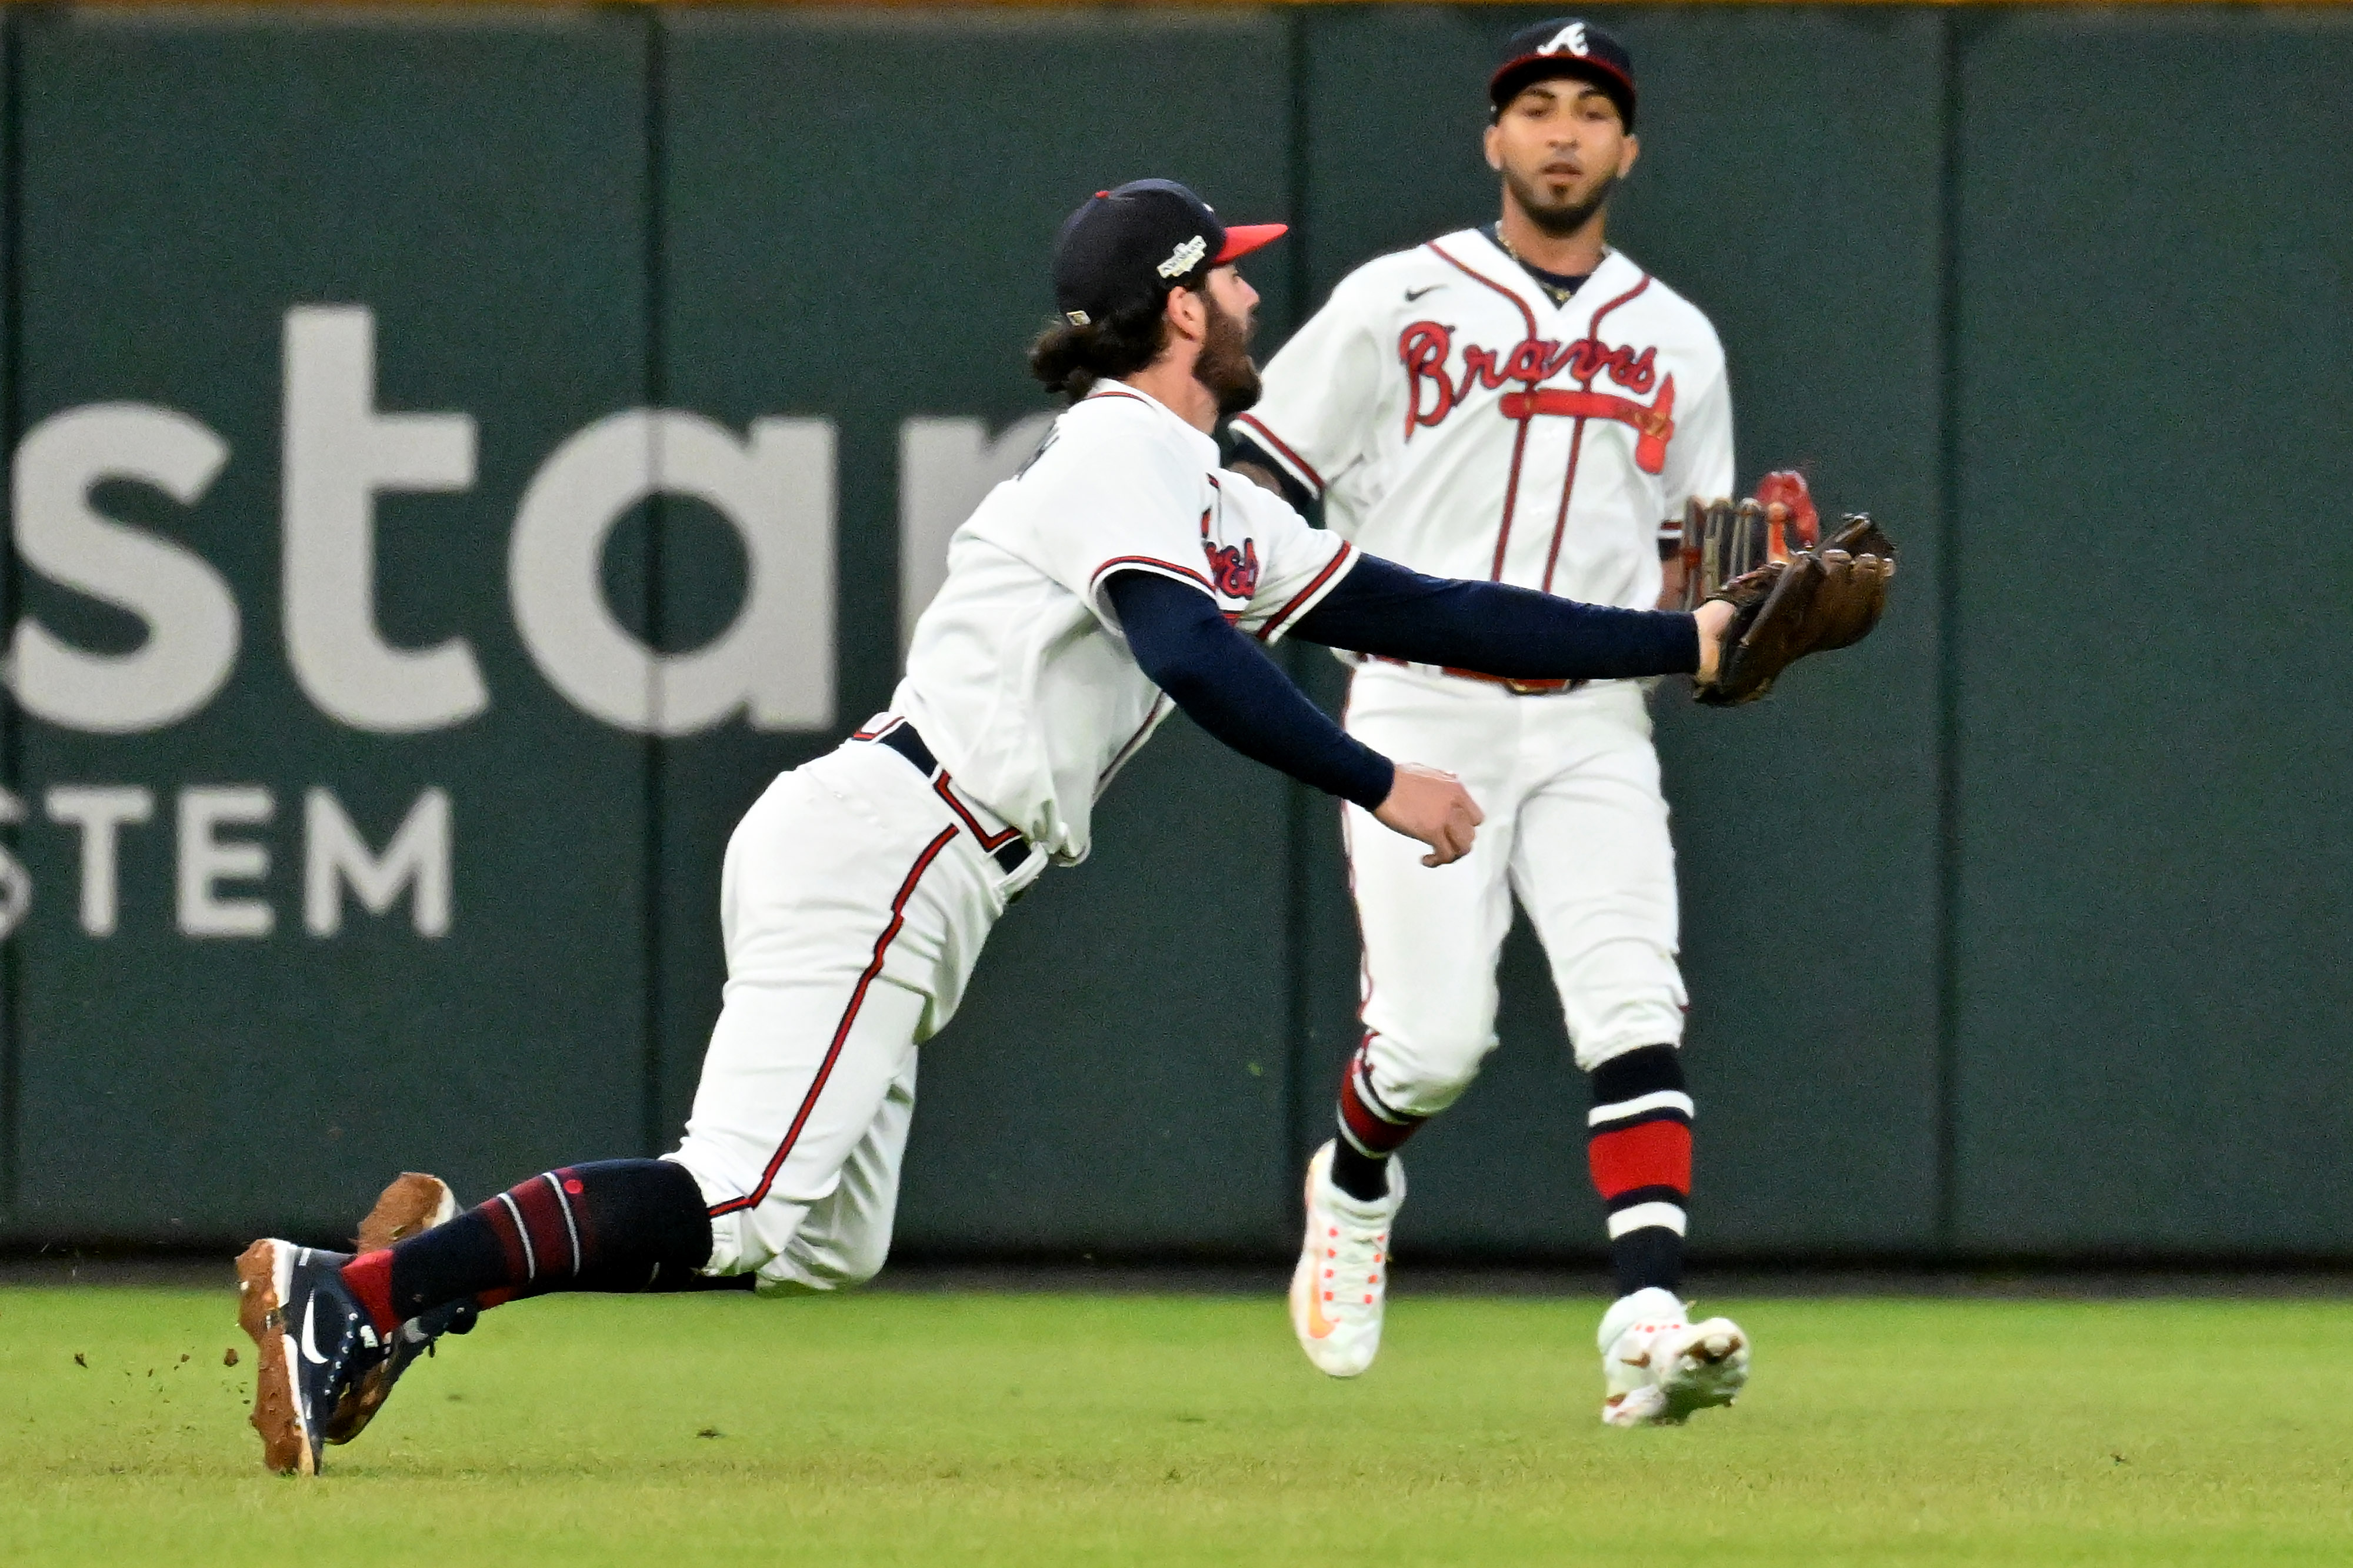 Dansby Swanson among four Braves as Gold Glove finalists